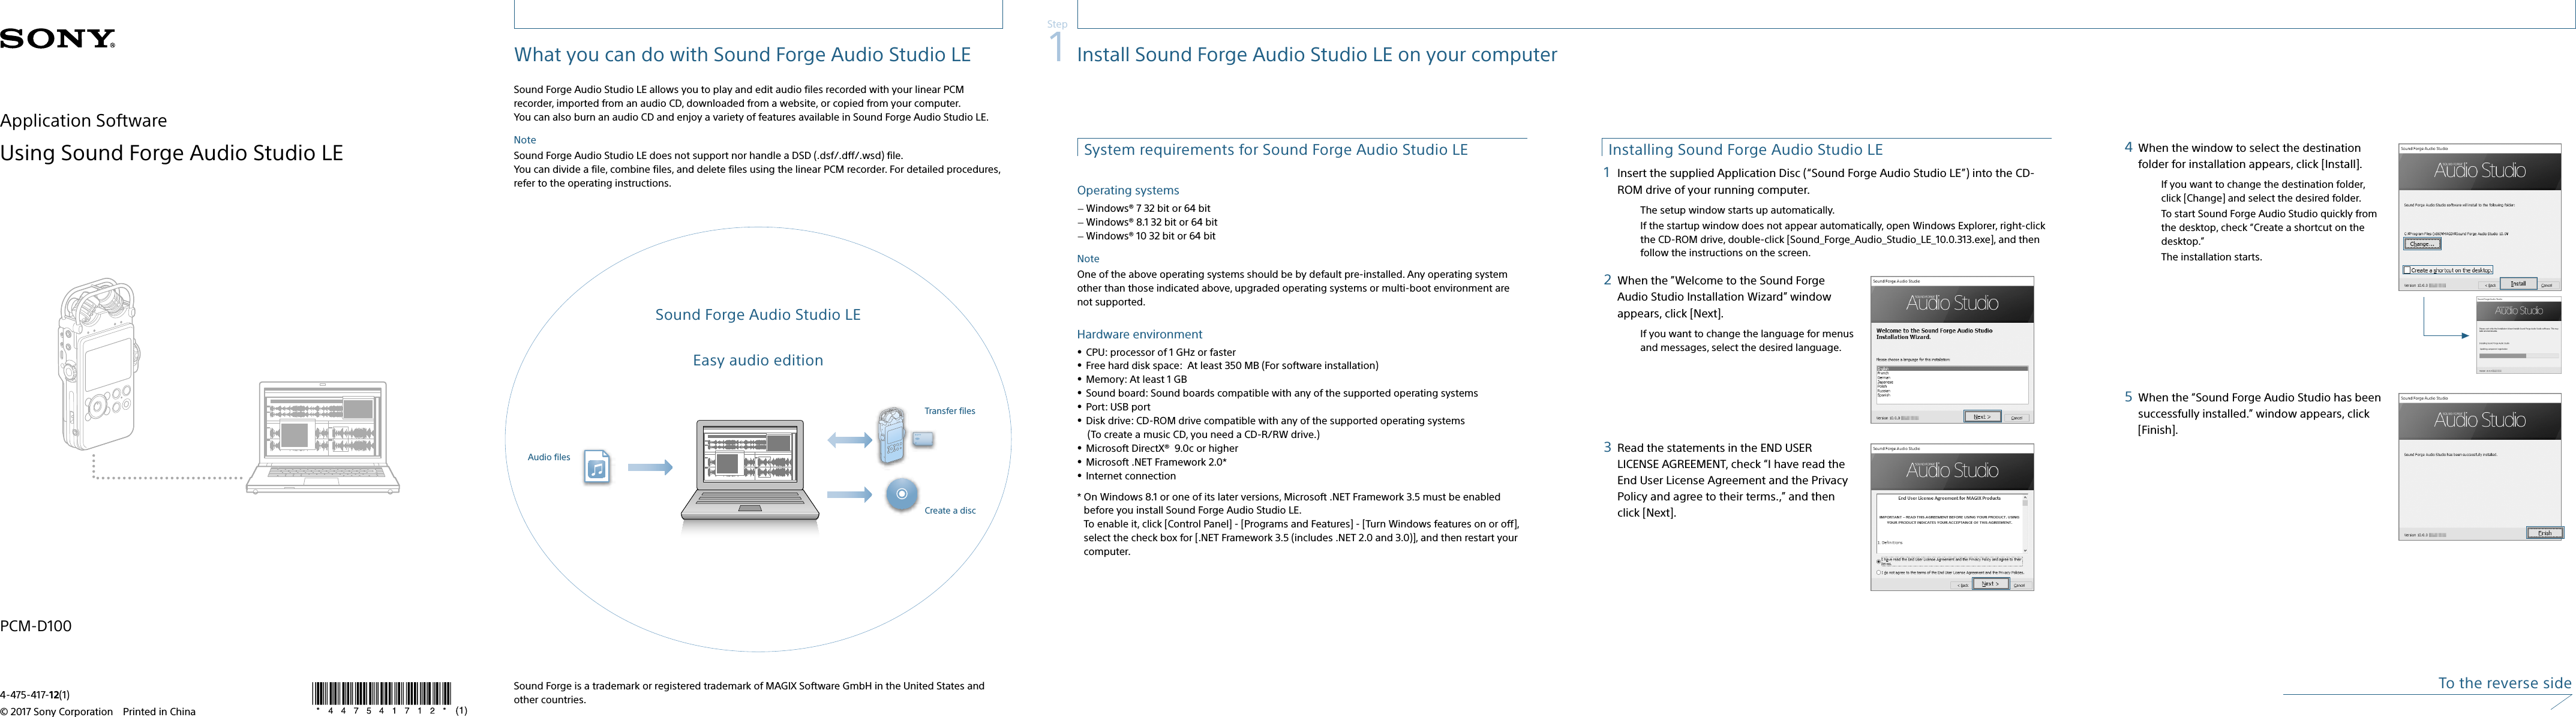 Page 1 of 2 - Sony PCM-D100 User Manual Using Sound Forge Audio Studio LE QSG 4475417121